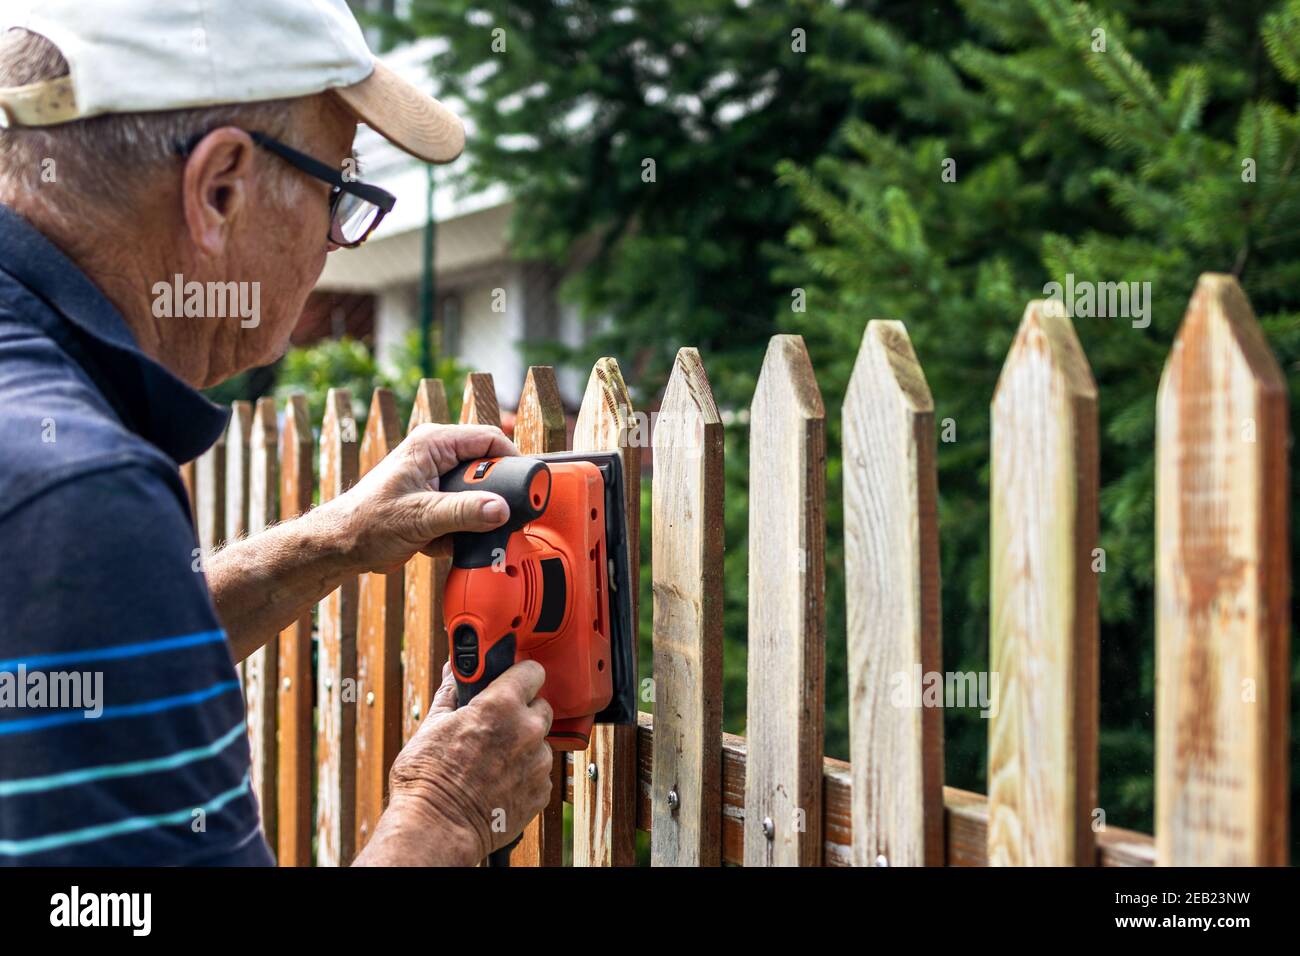 Sanding and preparing wooden fence for painting. Craftsperson restoring picket fence at backyard Stock Photo